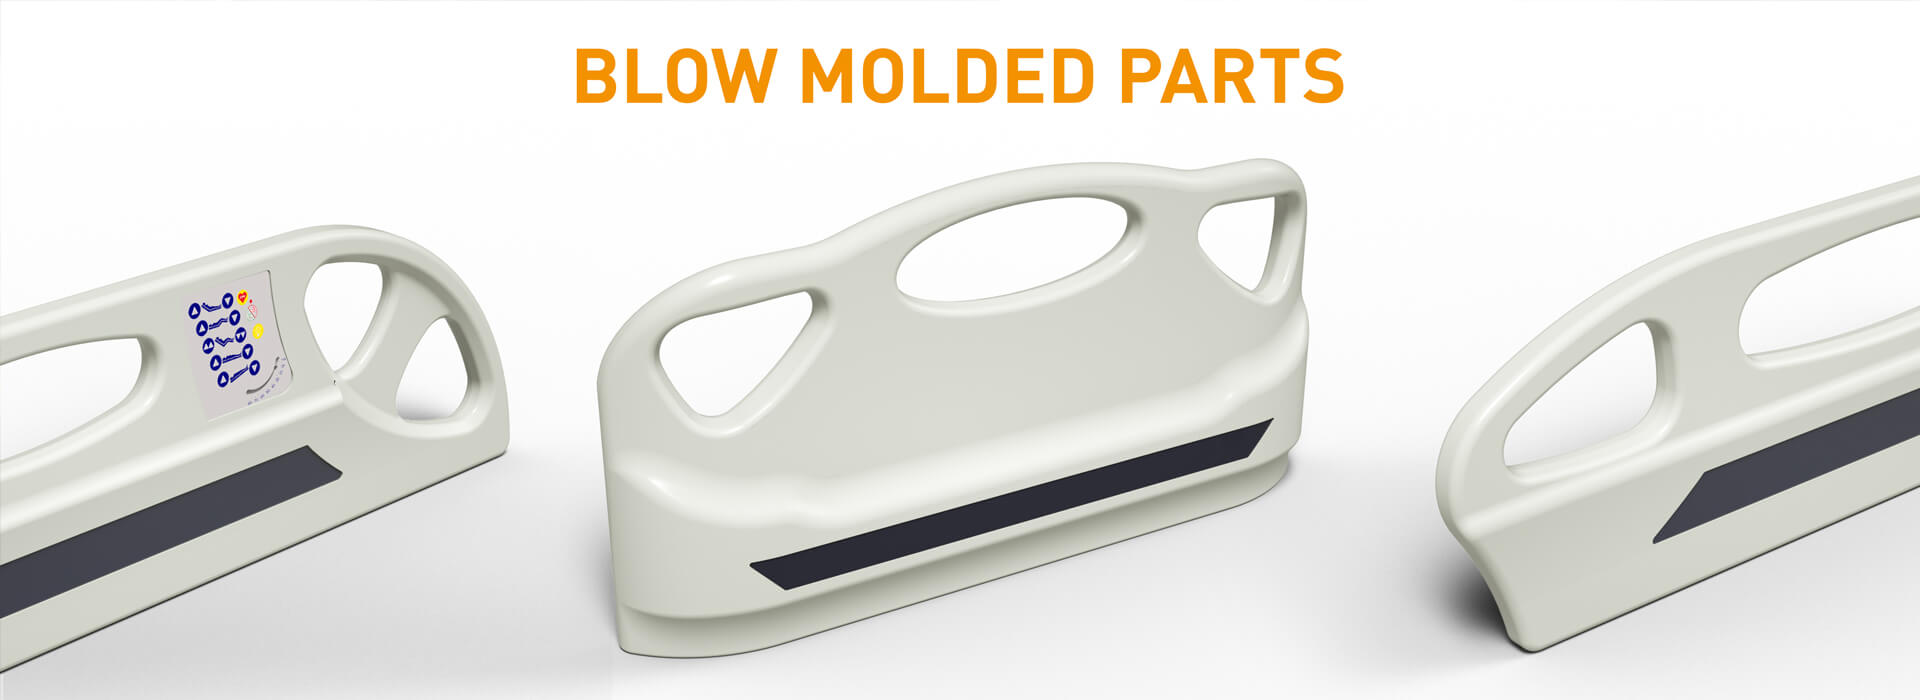 Blow Molded Parts